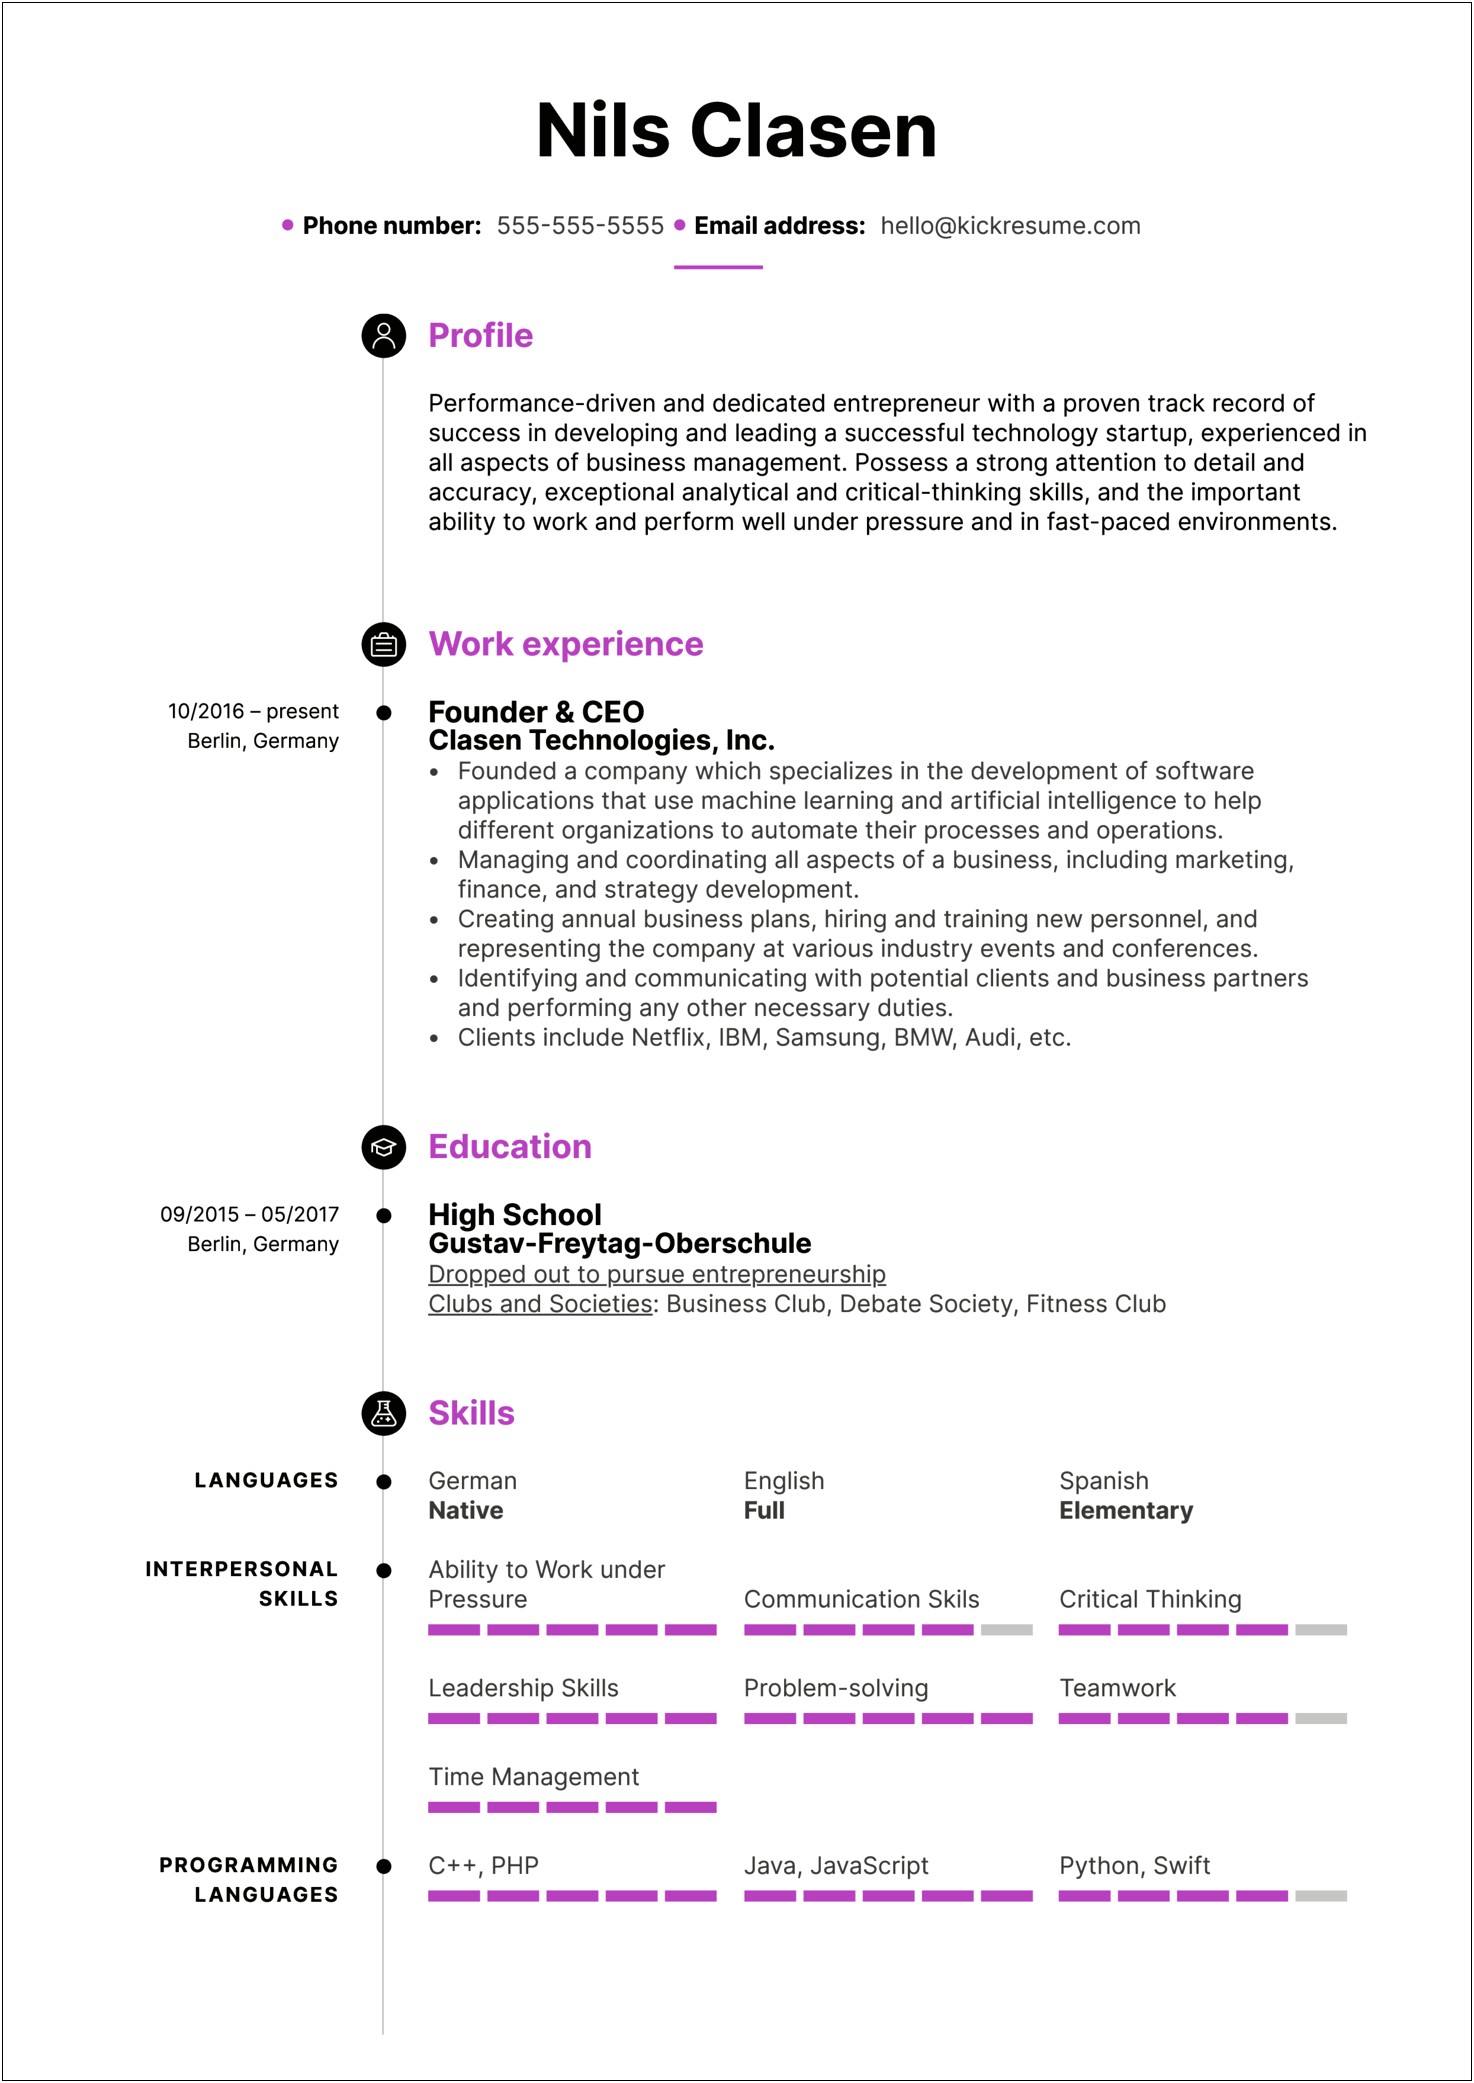 Writing A High School Resume For College Admissions